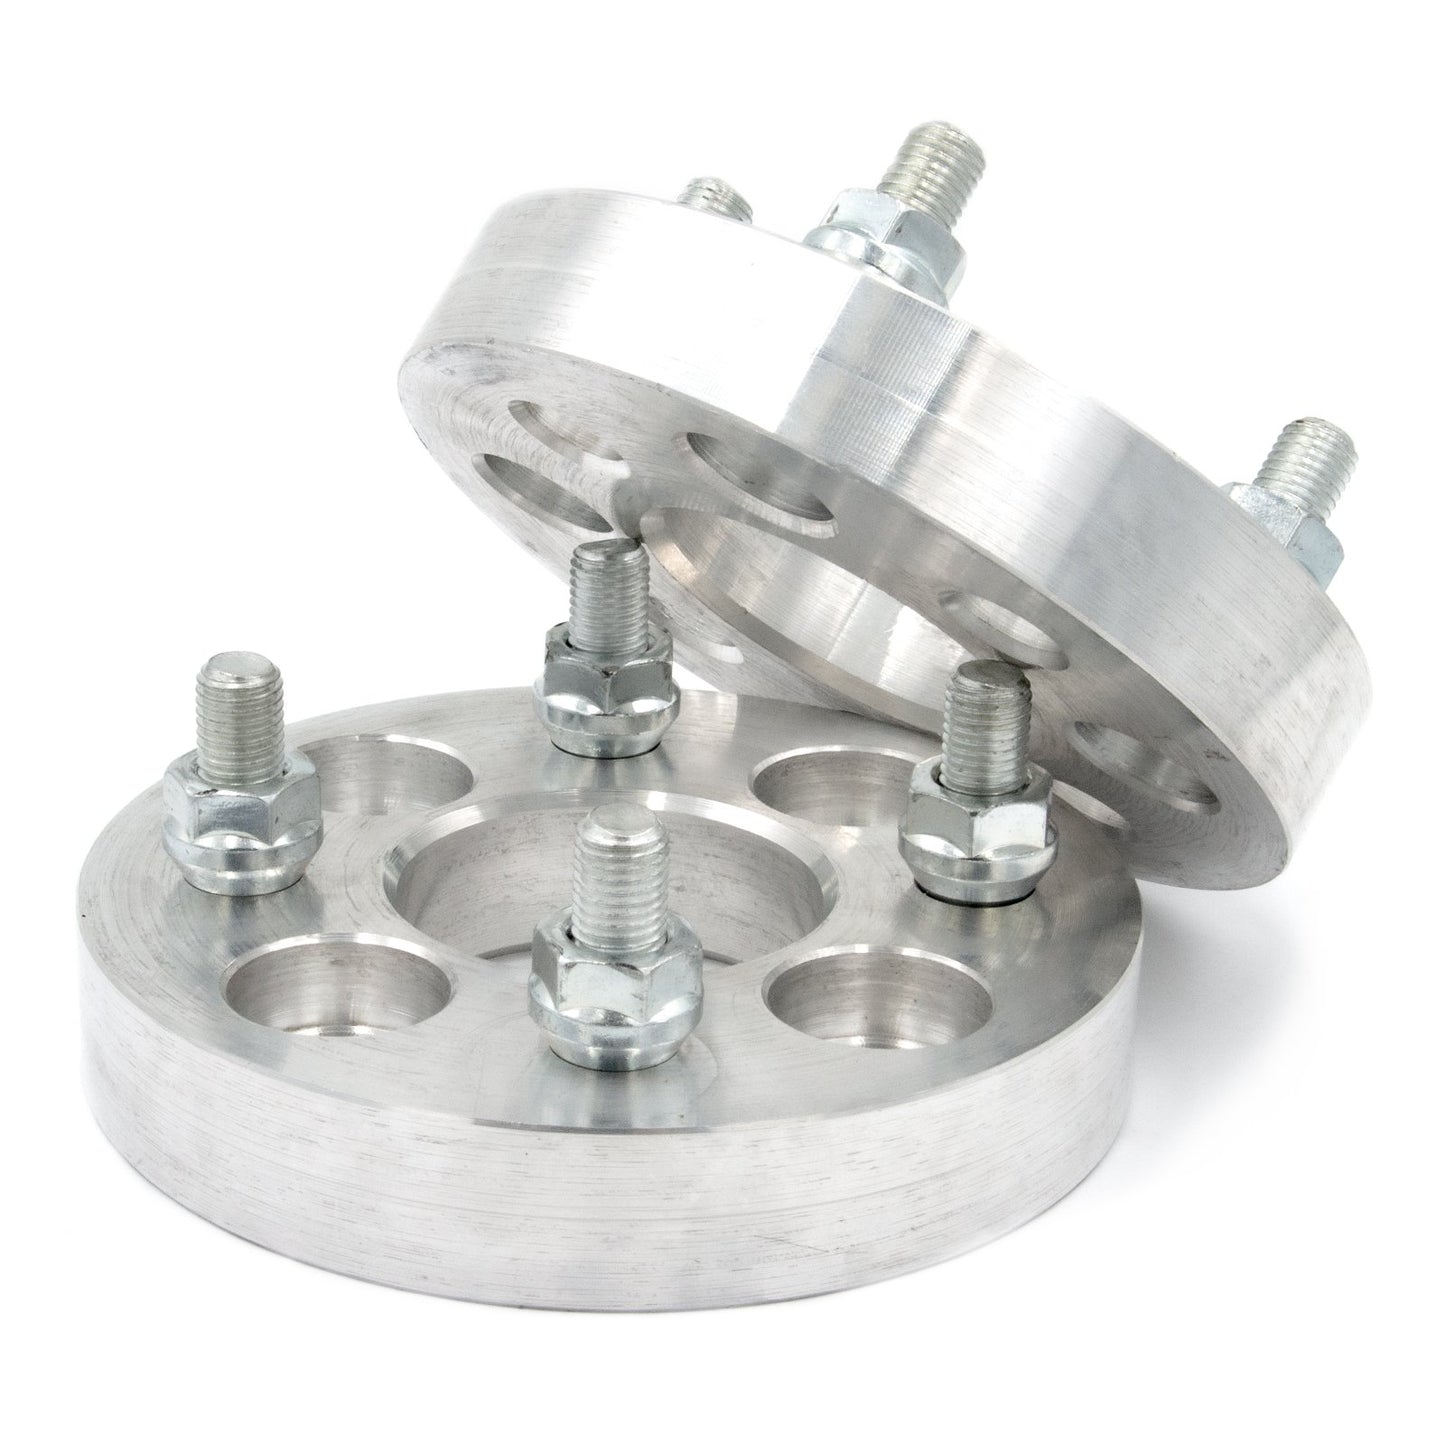 4x4.5" to 4x4.5" Wheel Spacer/Adapter - Thickness: 3/4"- 4"